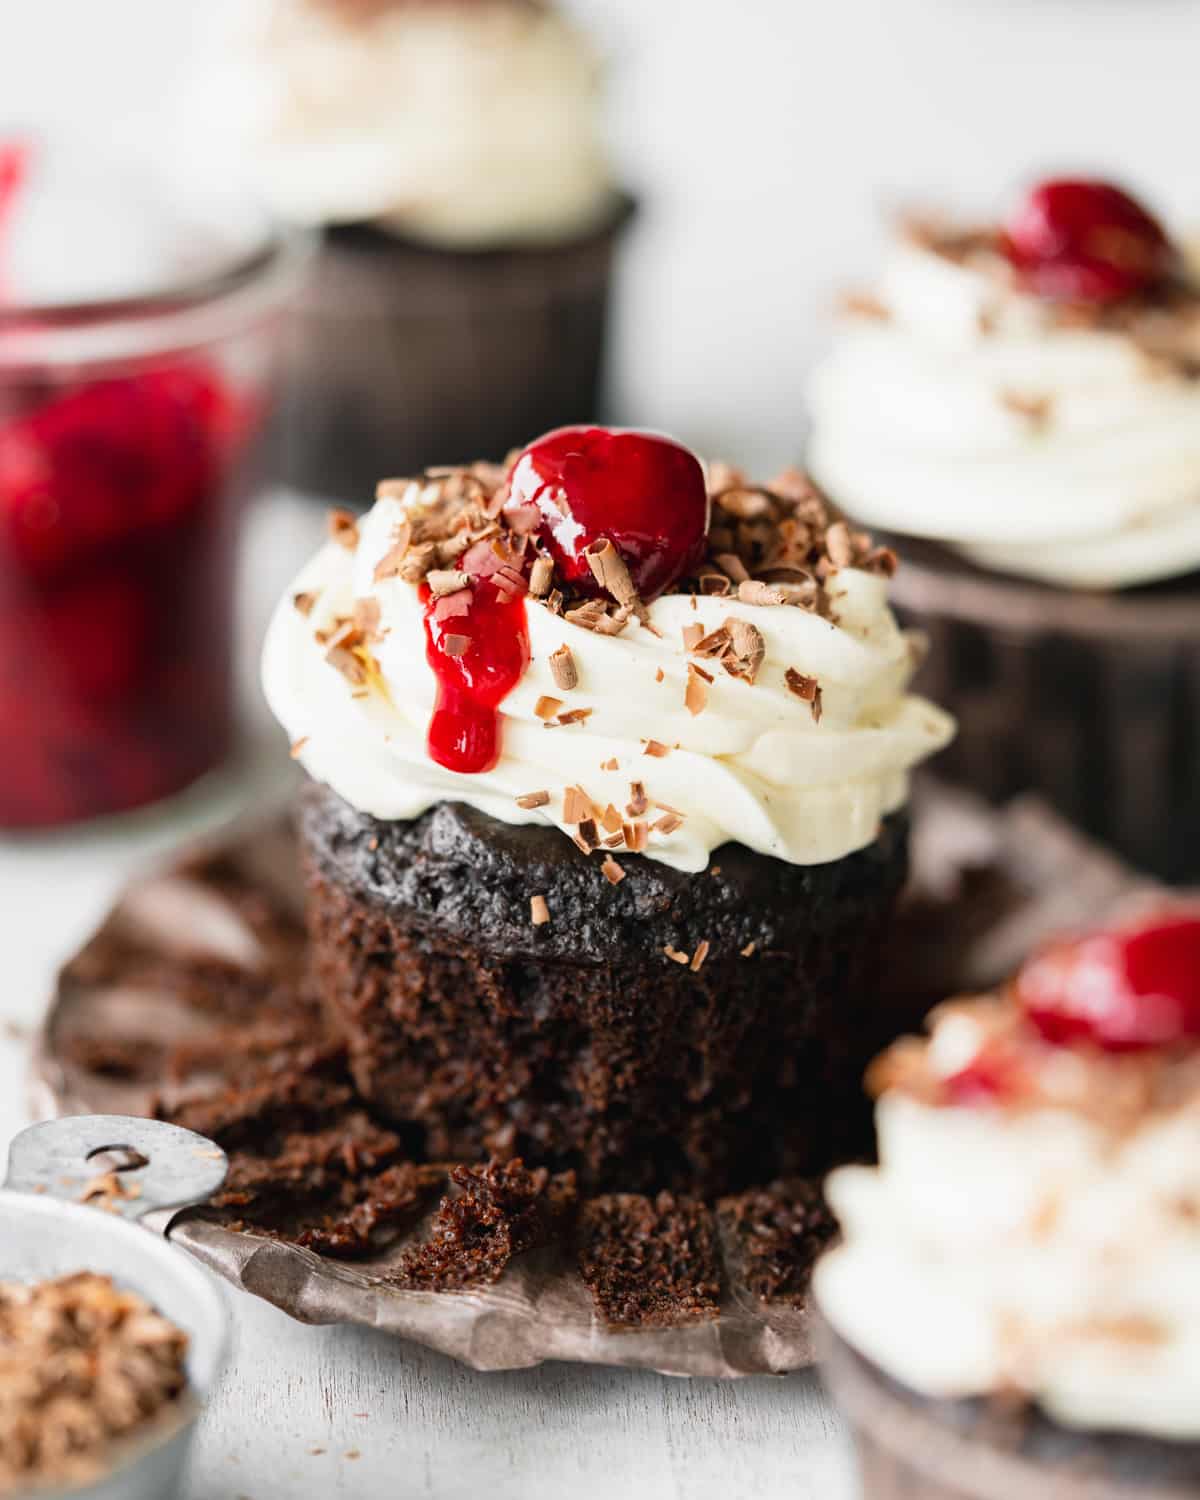 chocolate cupcakes with buttercream and cherries on top.